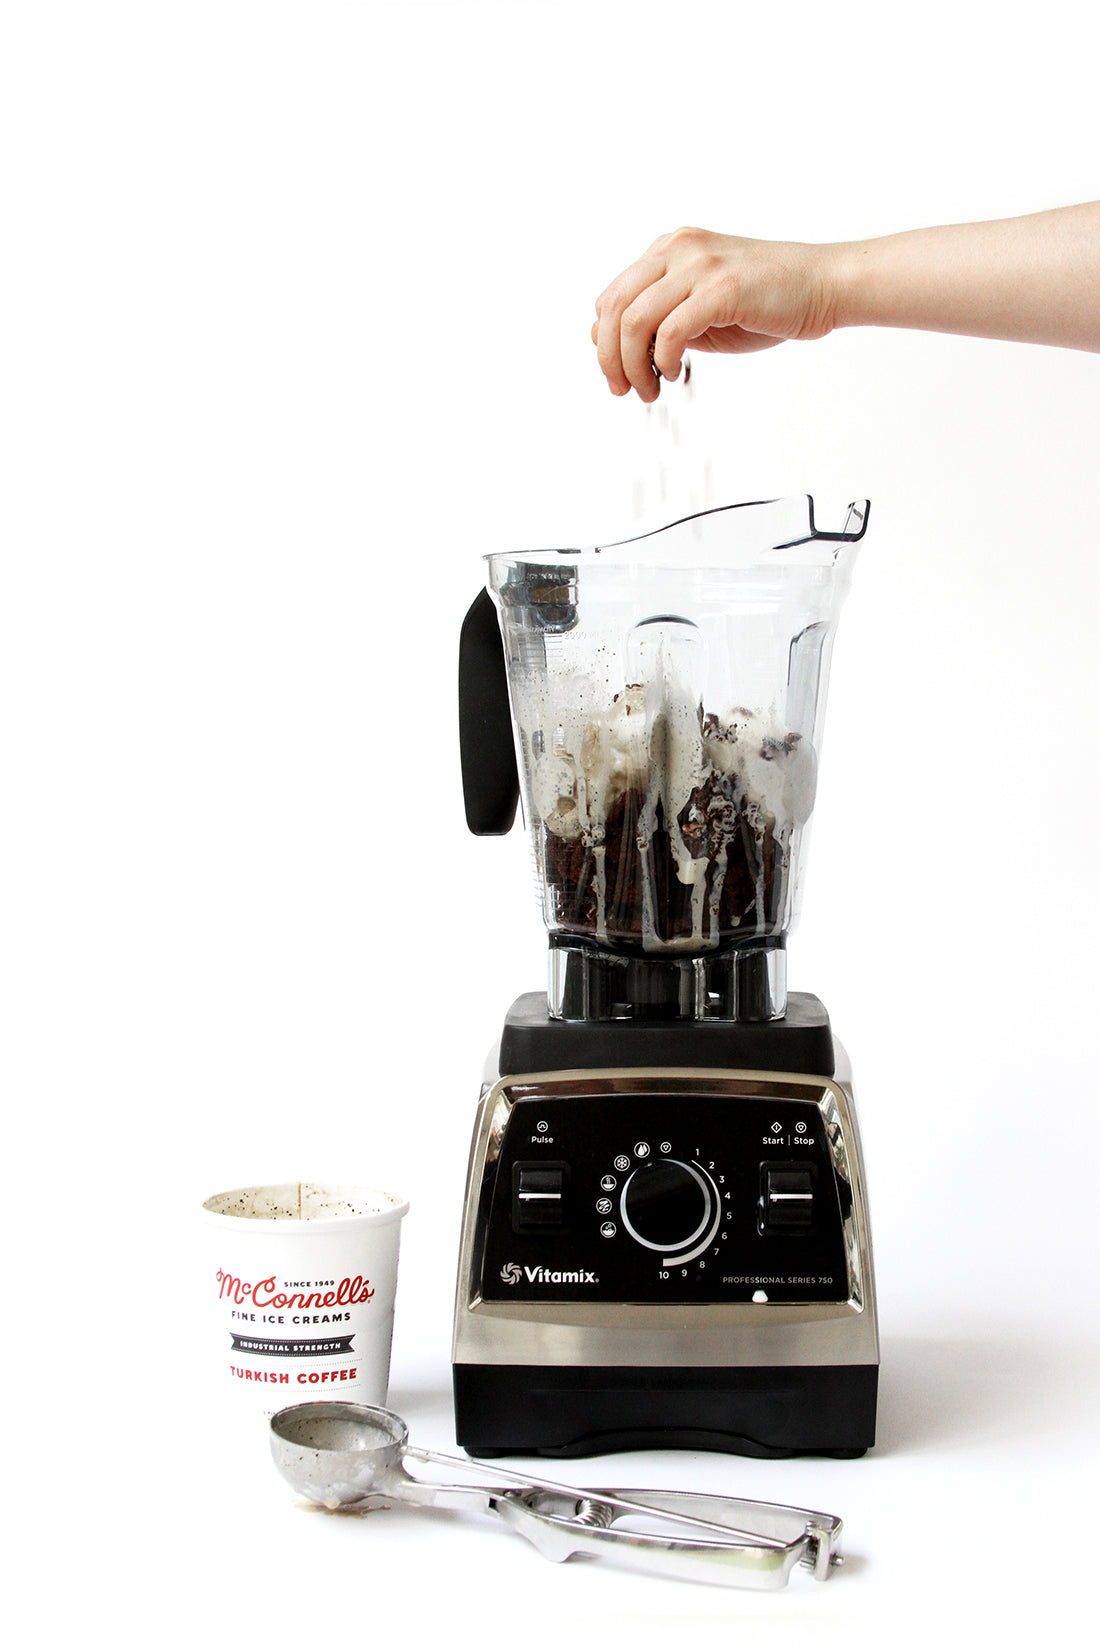 Image of a blender with ingredients for Miss Jones Baking Co Coffee Break Shake next to an ice cream scoop and a pint of McConnell's Fine Ice Cream